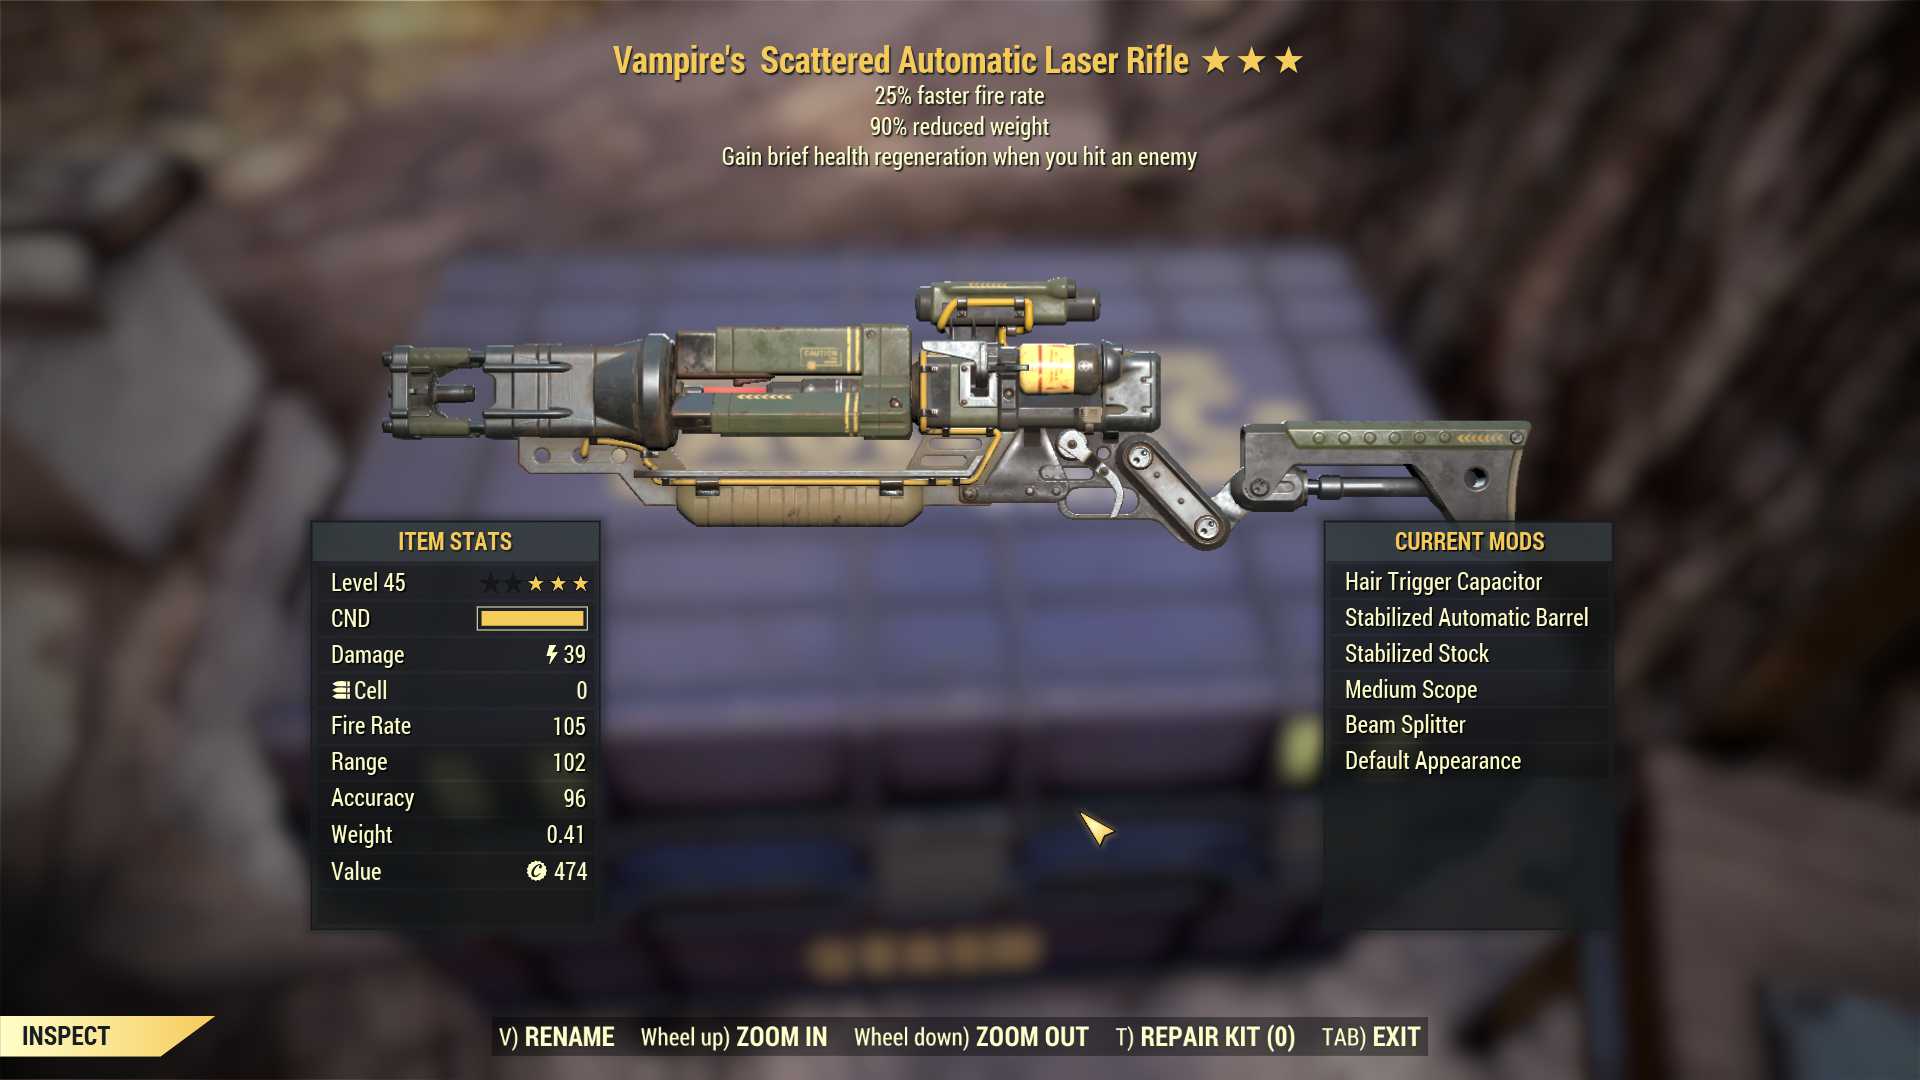 Vampire's Laser rifle (25% faster fire rate, 90% reduced weight)